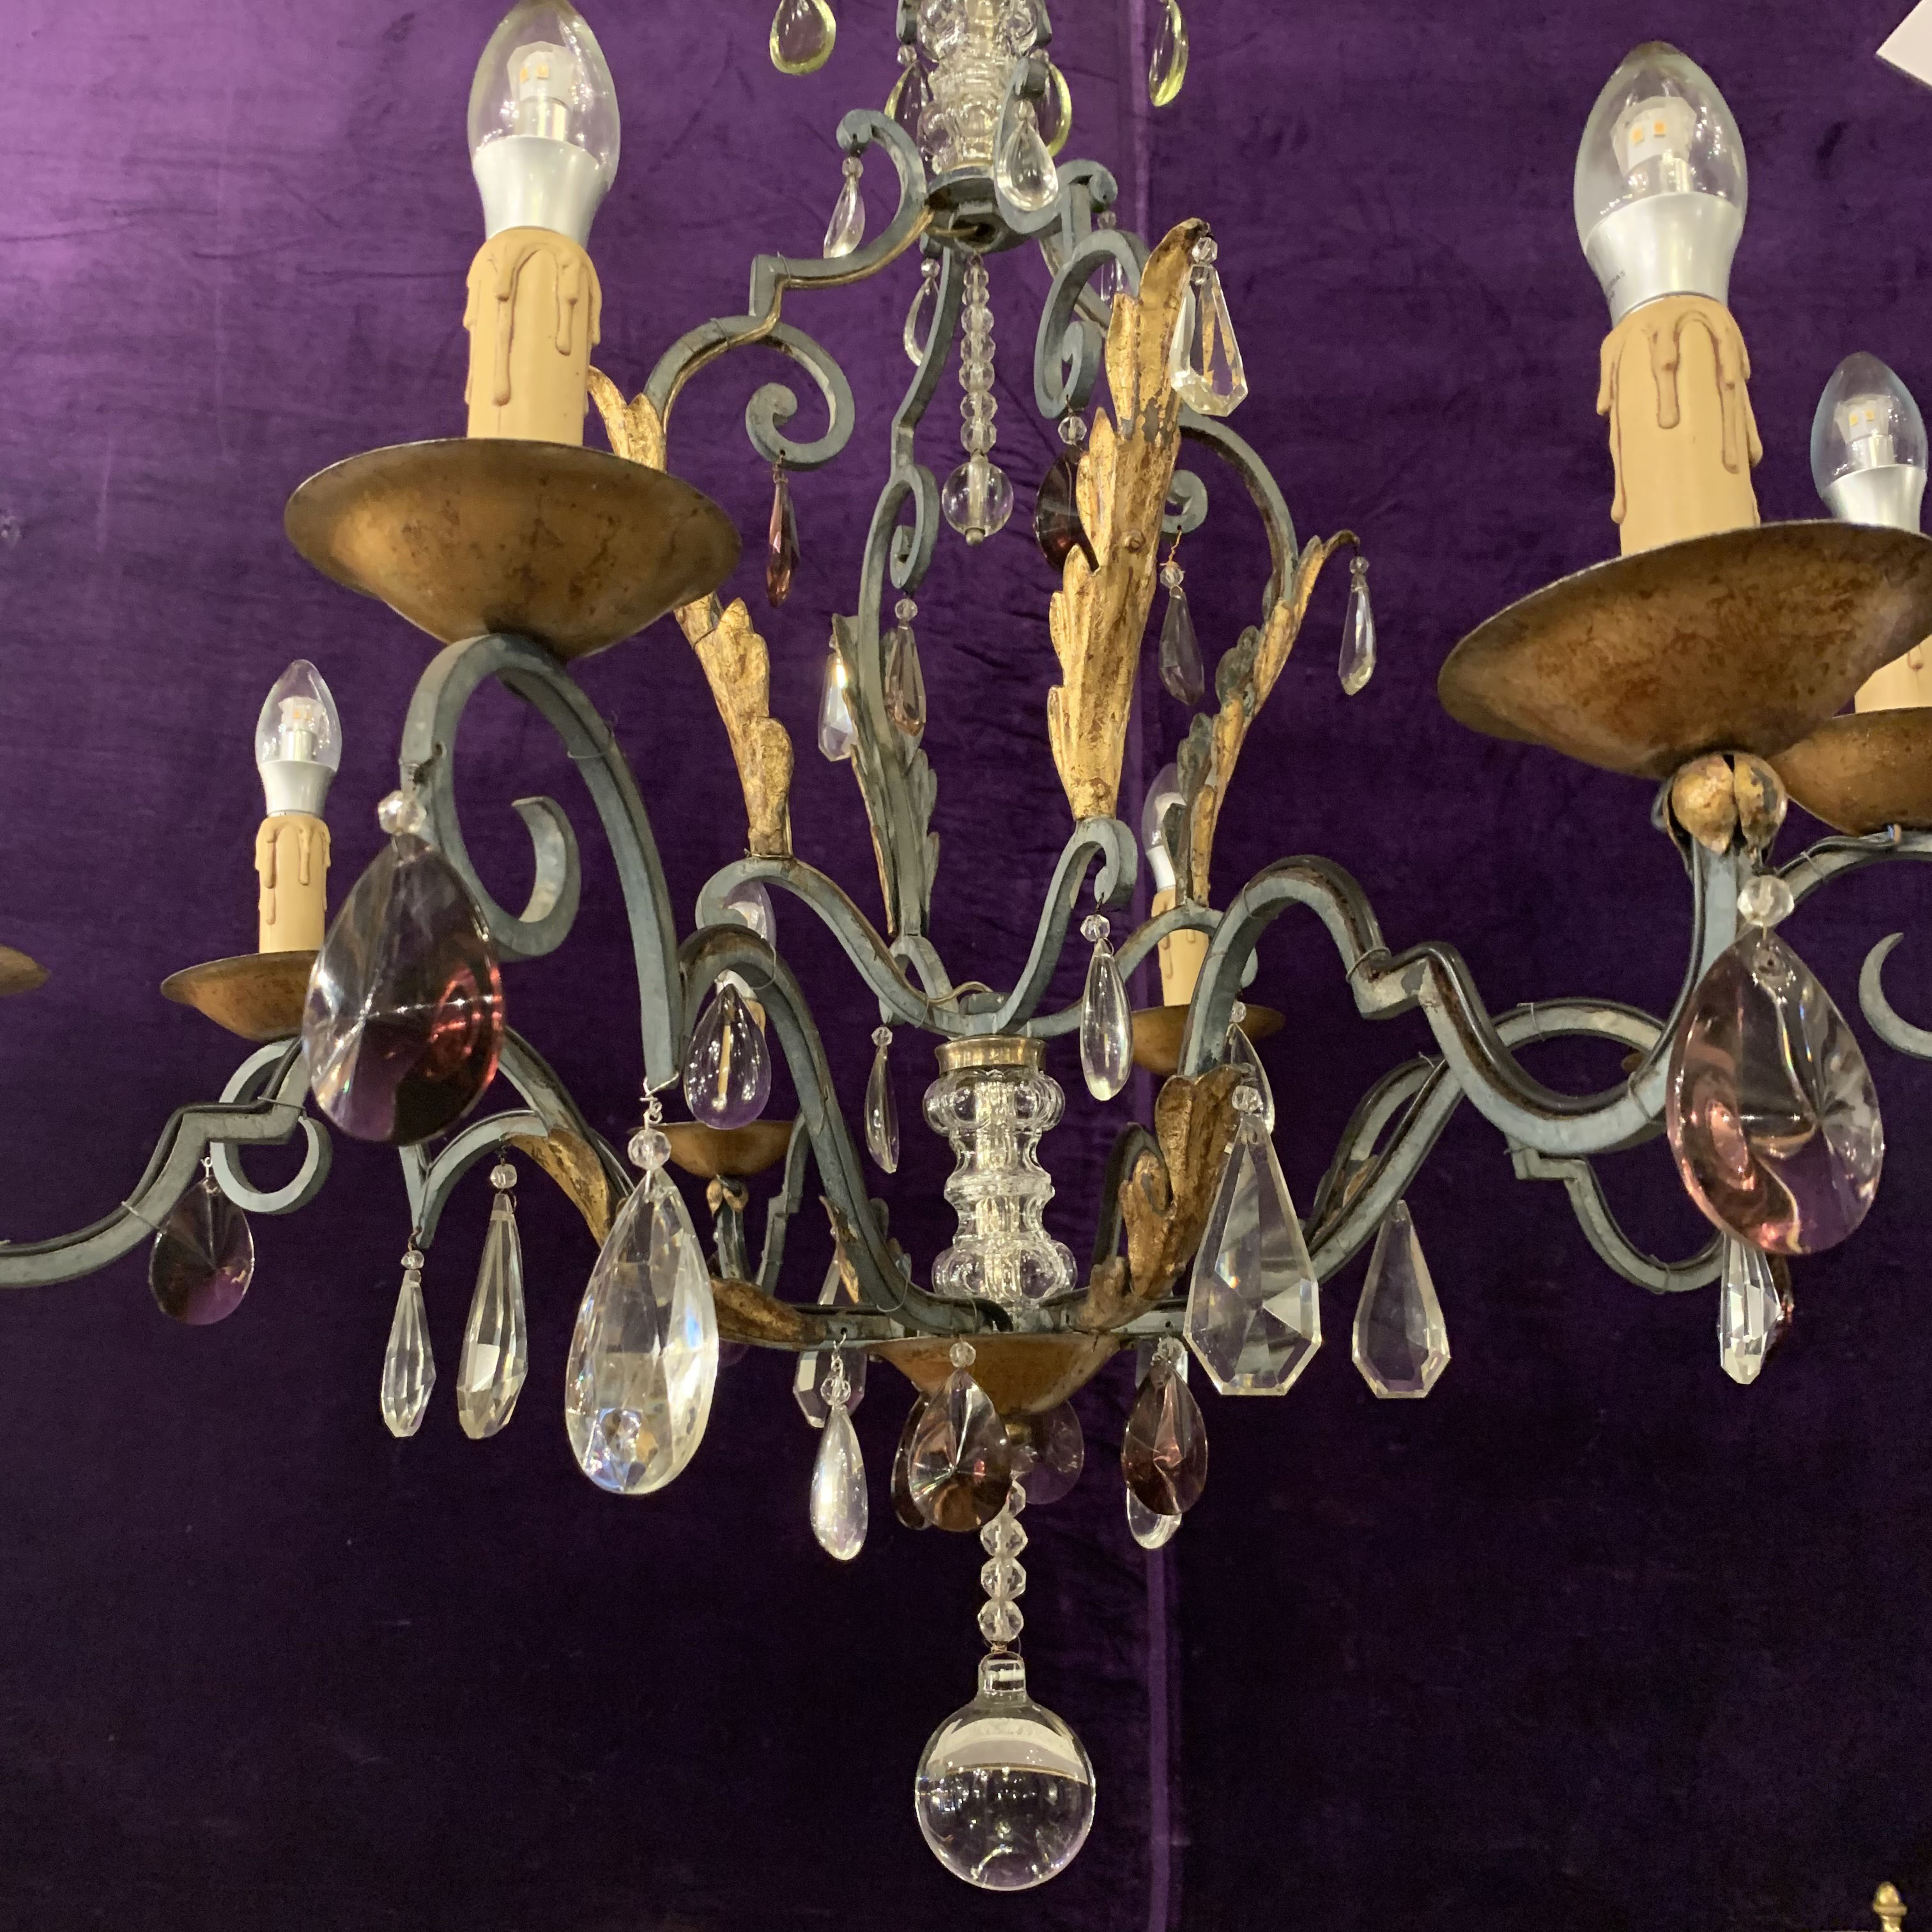 Wrought Iron Chandelier with Gold Leaf detail and Purple Crystals